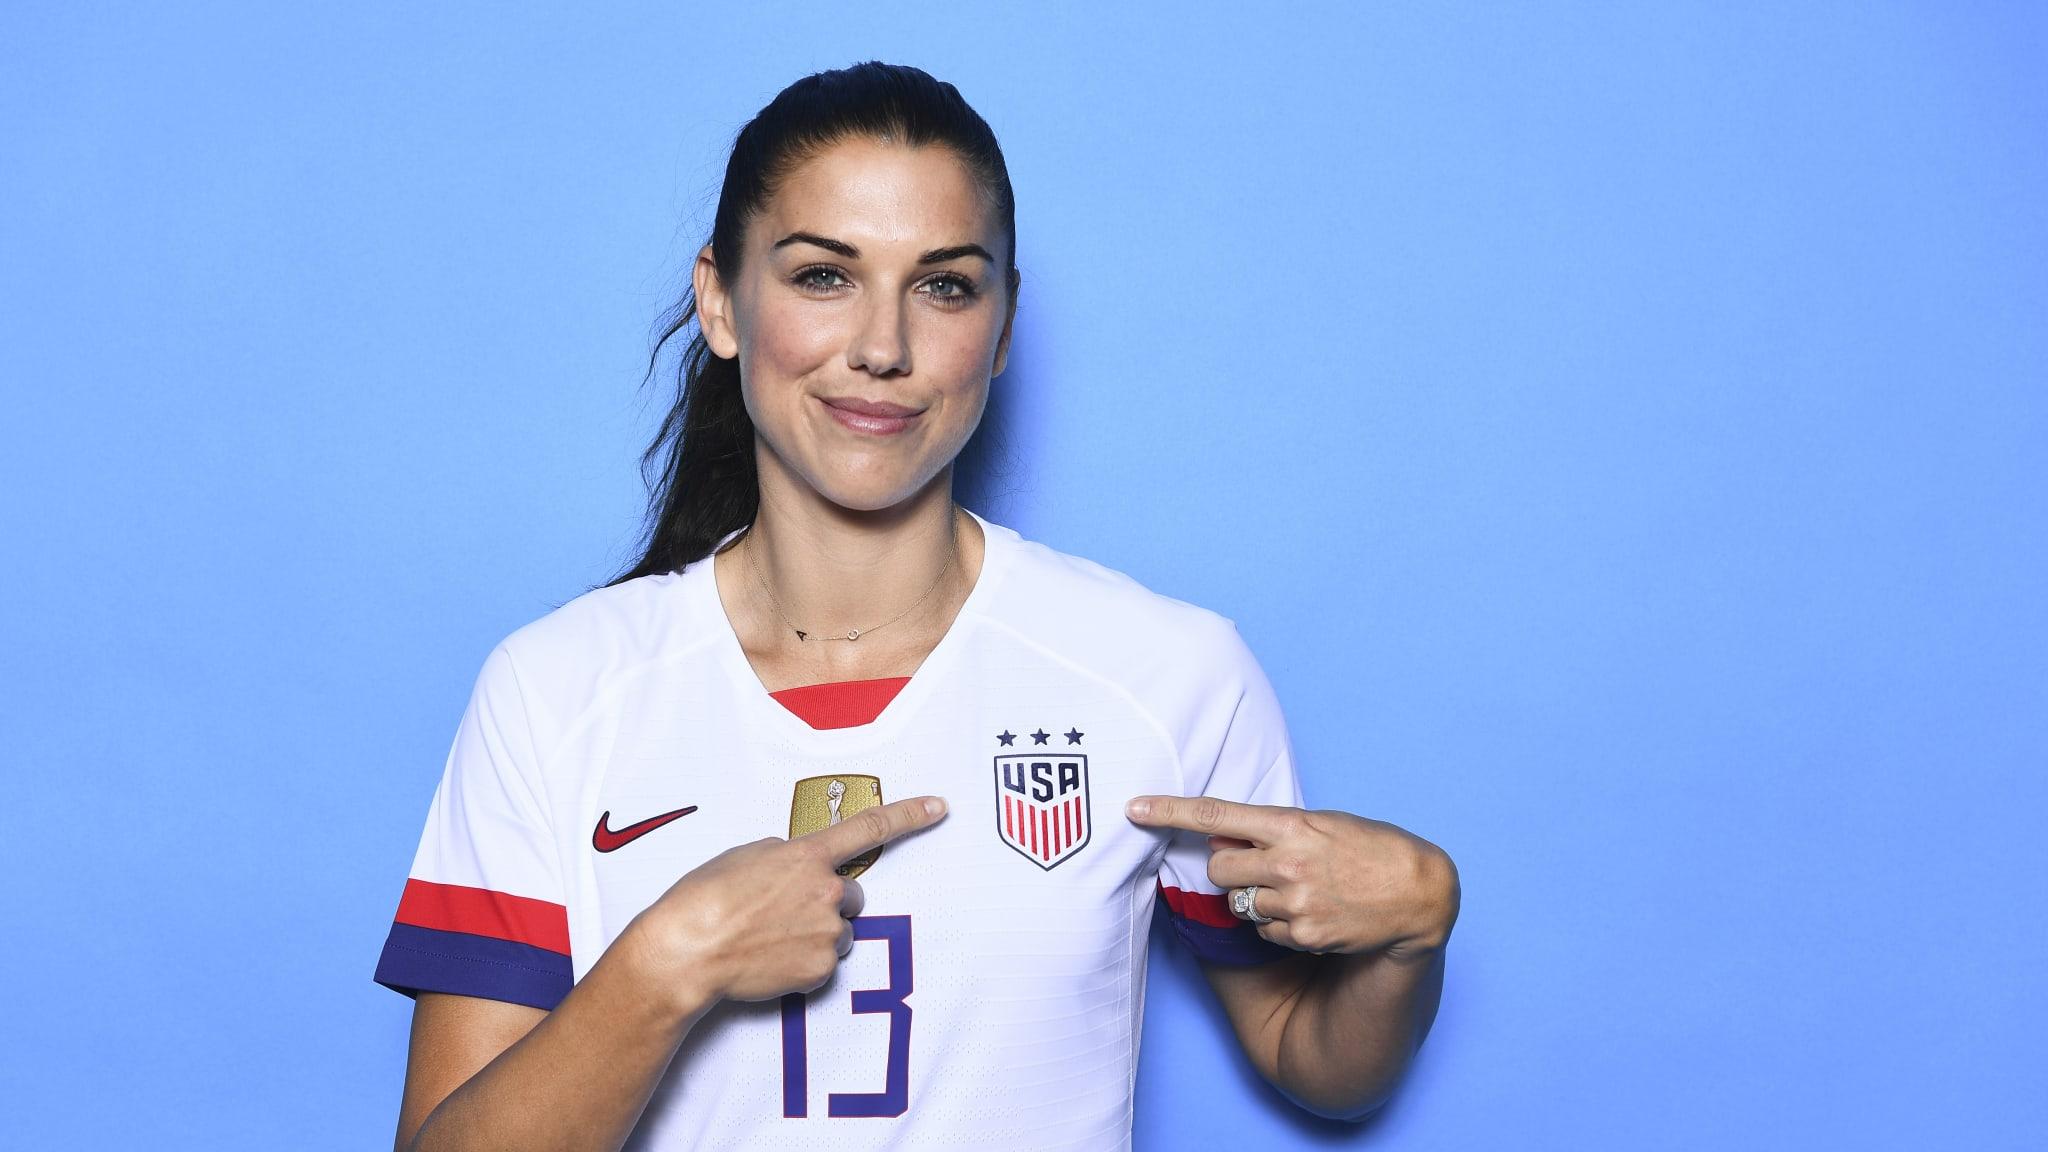 FIFA Women's World Cup 2019™ 19ers look to